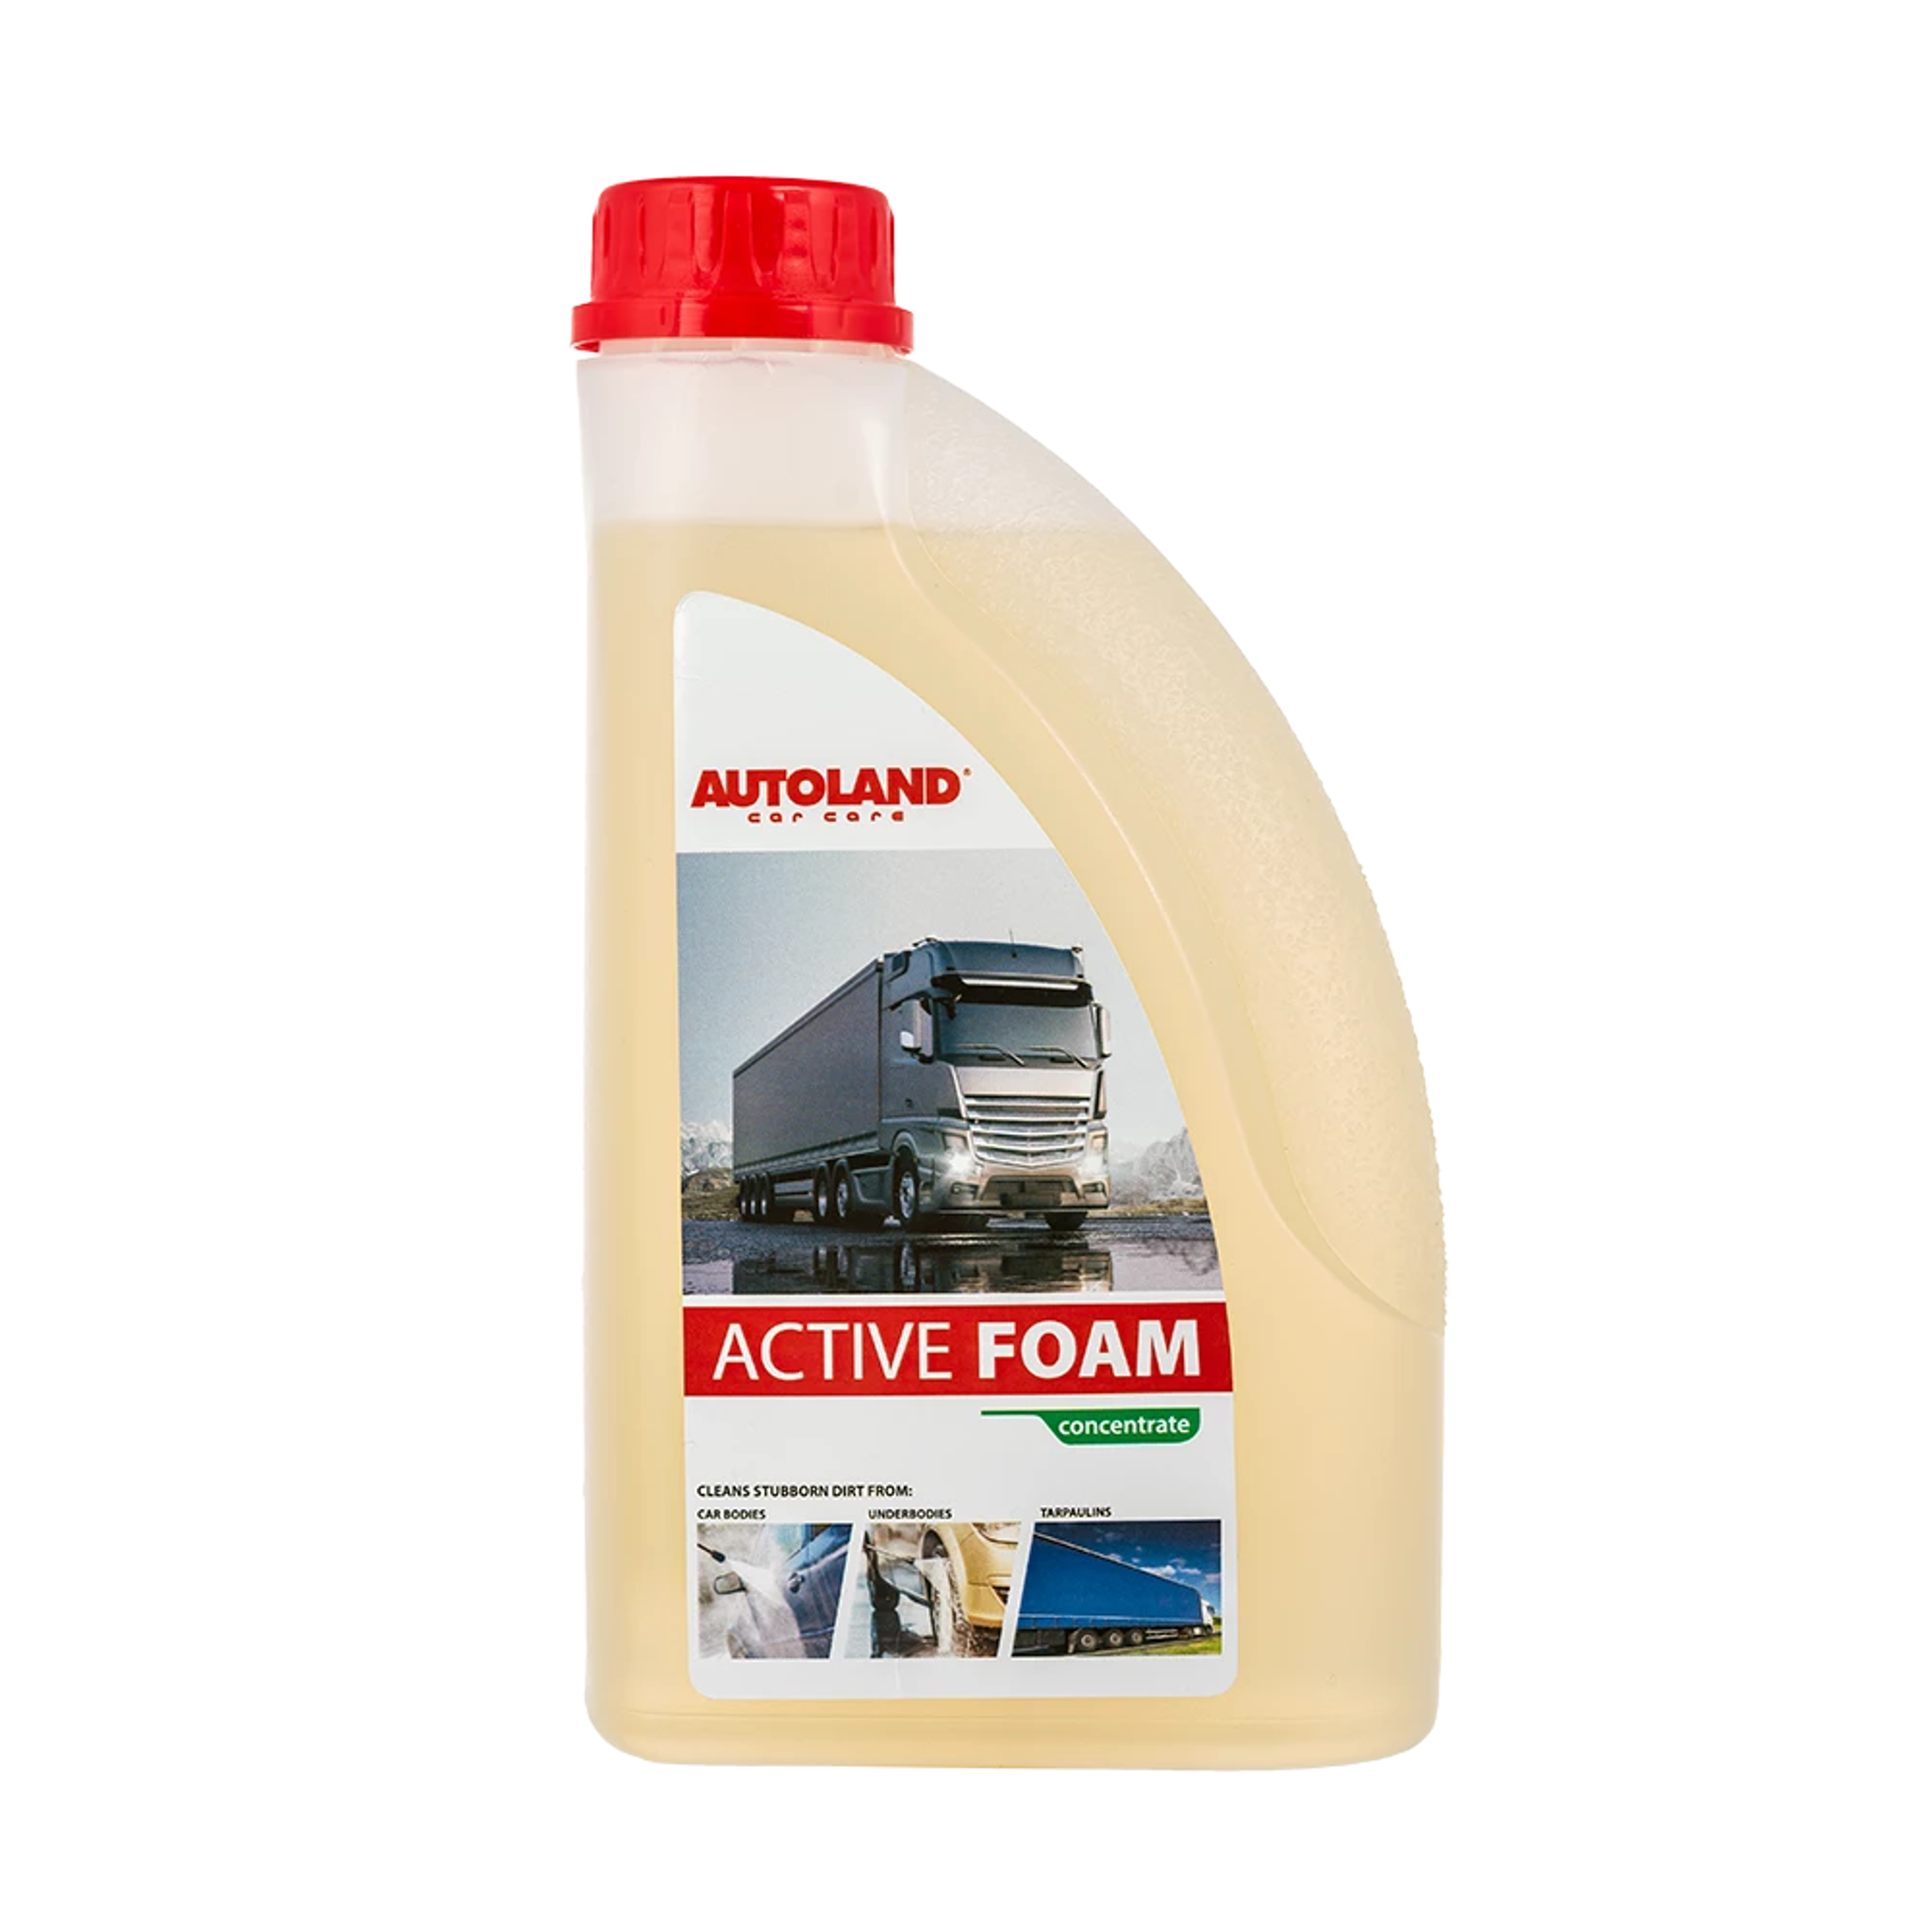 ACTIVE FOAM CONCENTRATE